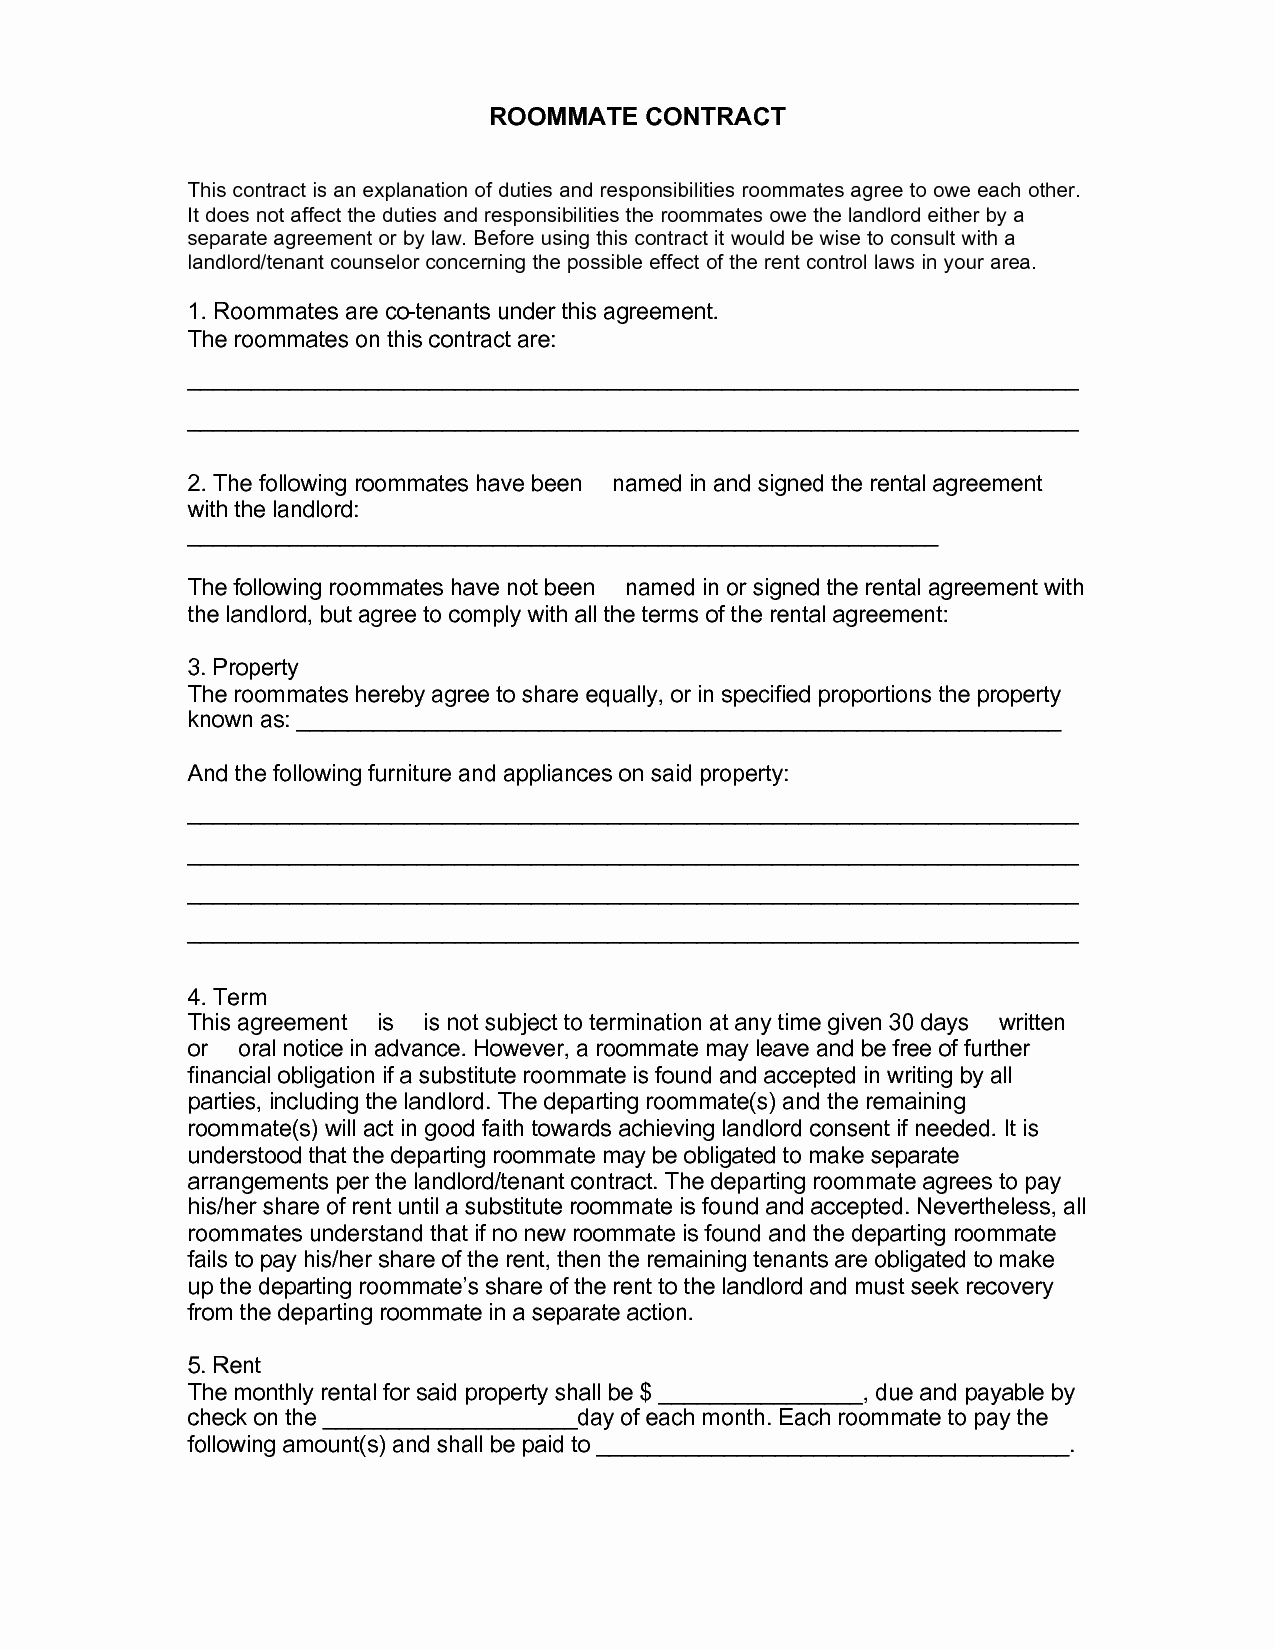 Living Agreement Contract Template New Pin by Crystal Mears Williams On forever Mine